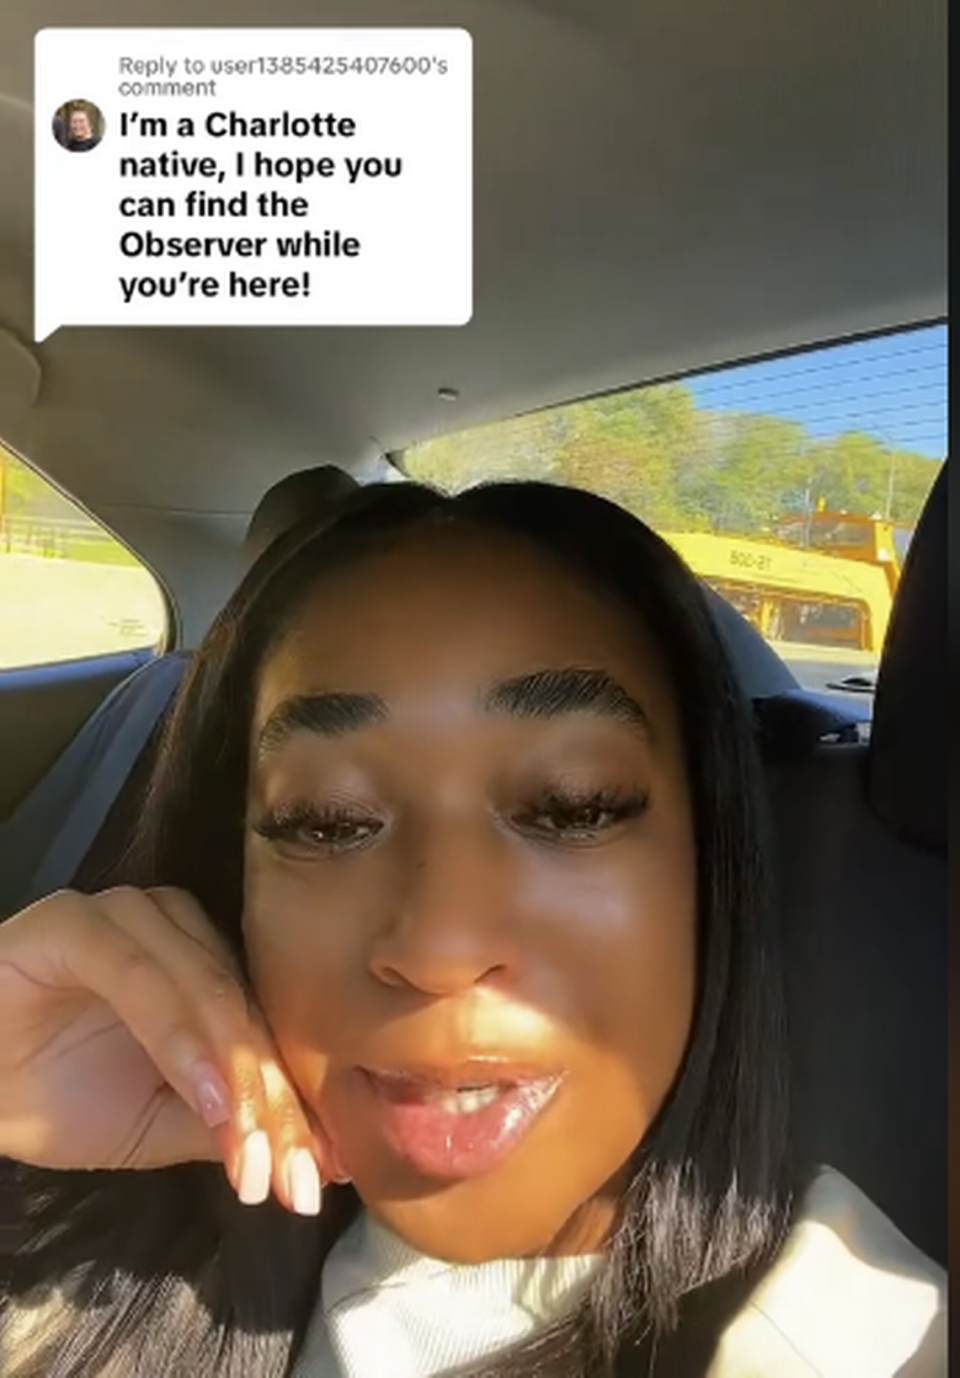 Kelsey Russell tried to find some copies of The Charlotte Observer when she passed through Charlotte Douglas International Airport last fall and came up empty-handed, so she make a TikTok about it.